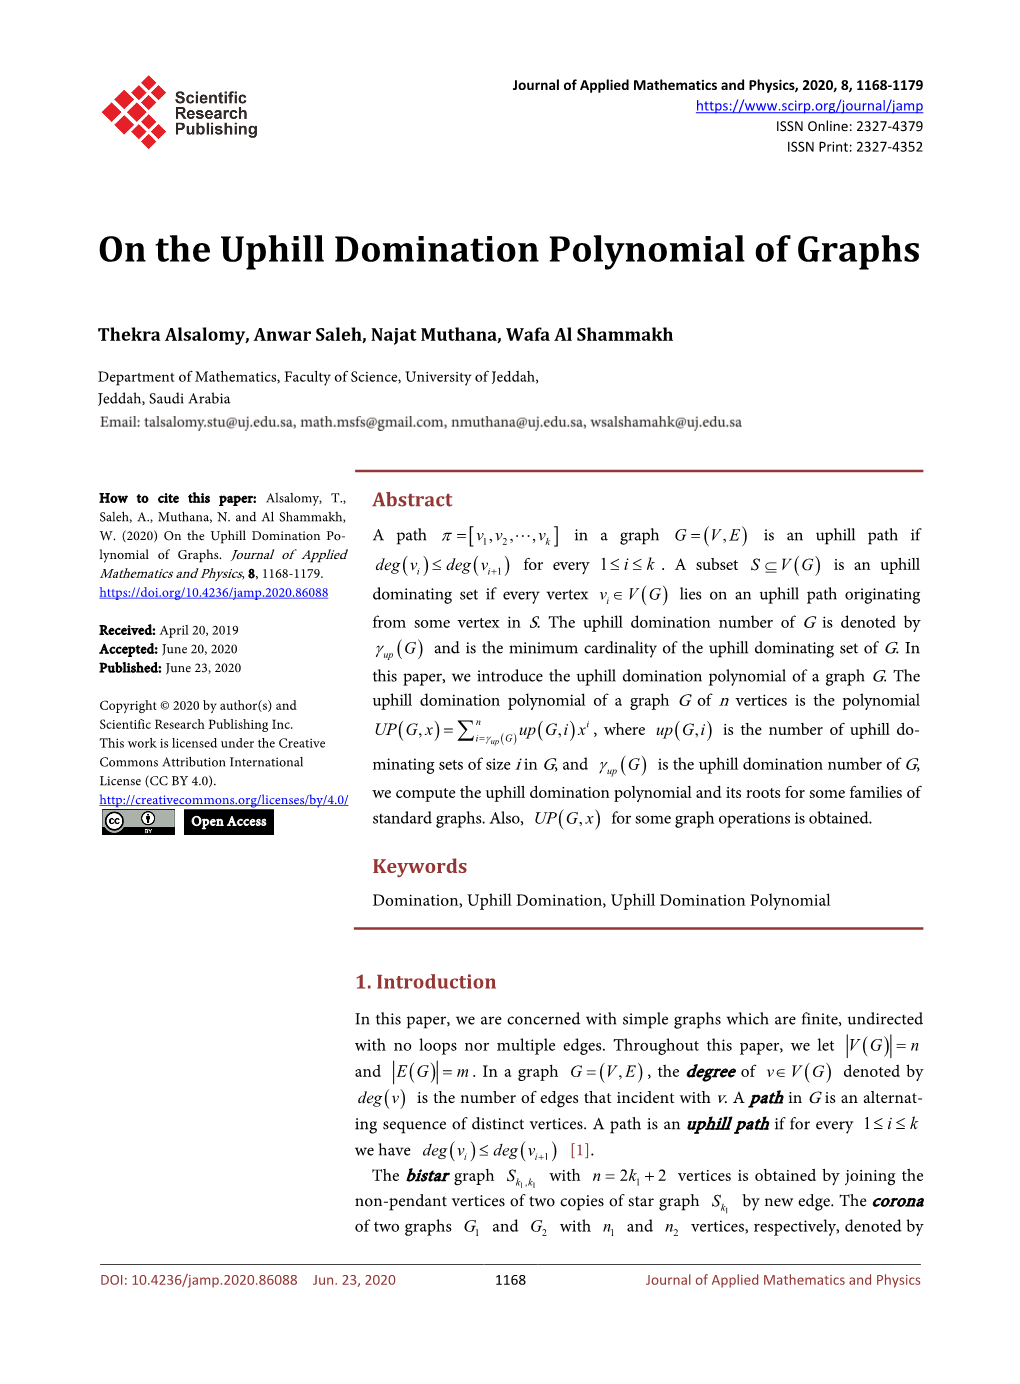 On the Uphill Domination Polynomial of Graphs